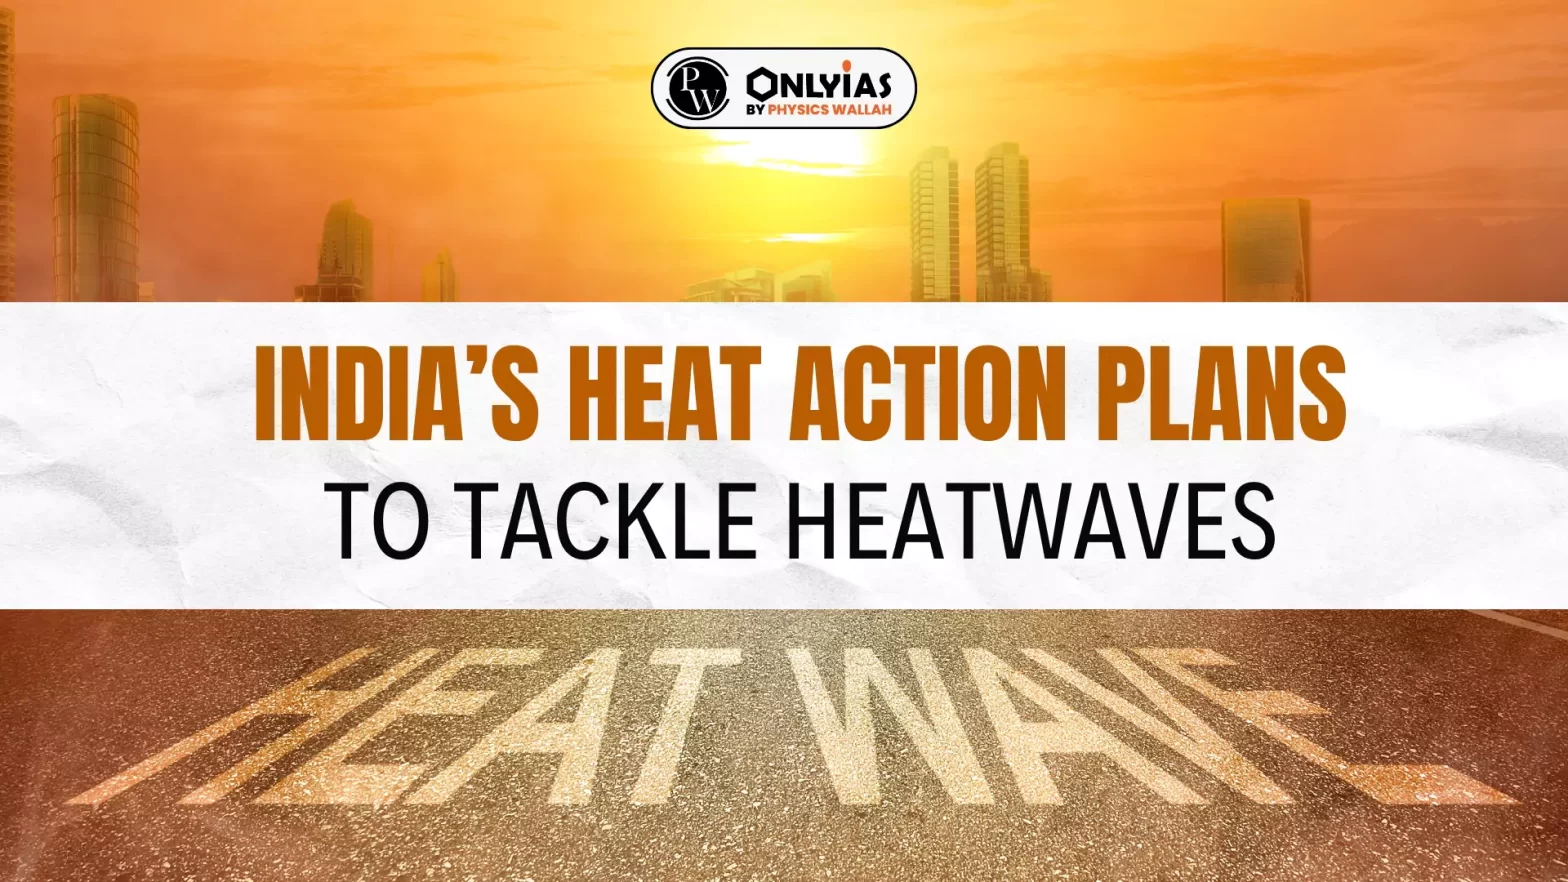 India’s Heat Action Plans to Tackle Heatwaves